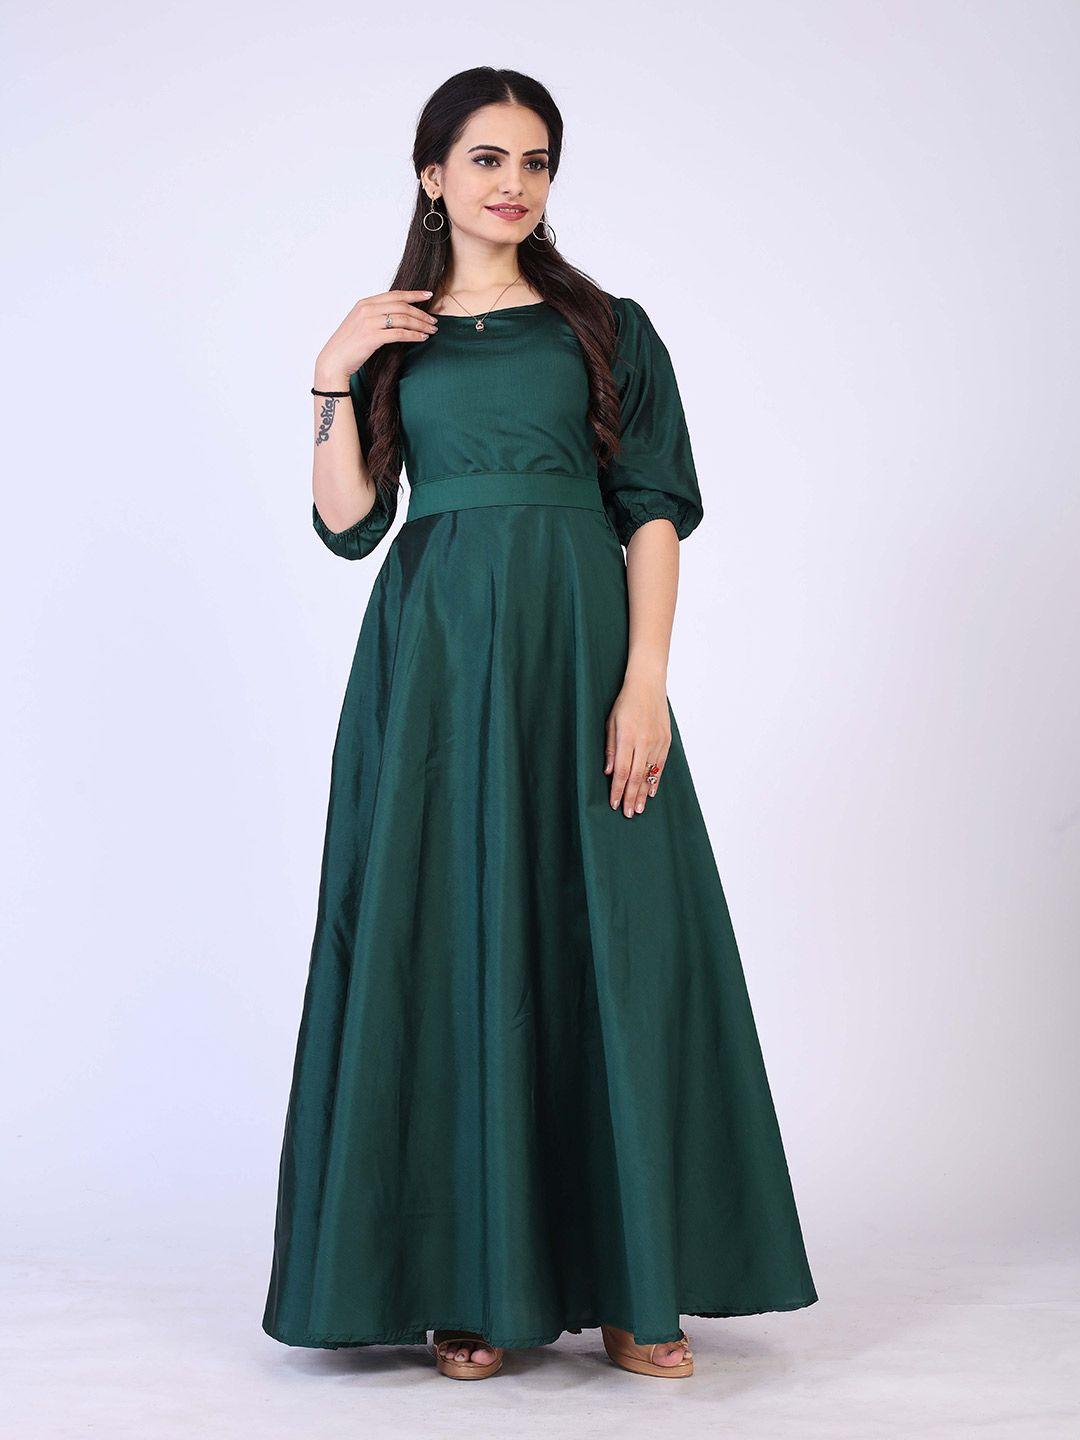 prenea green satin gathered or pleated solid silk gown dress